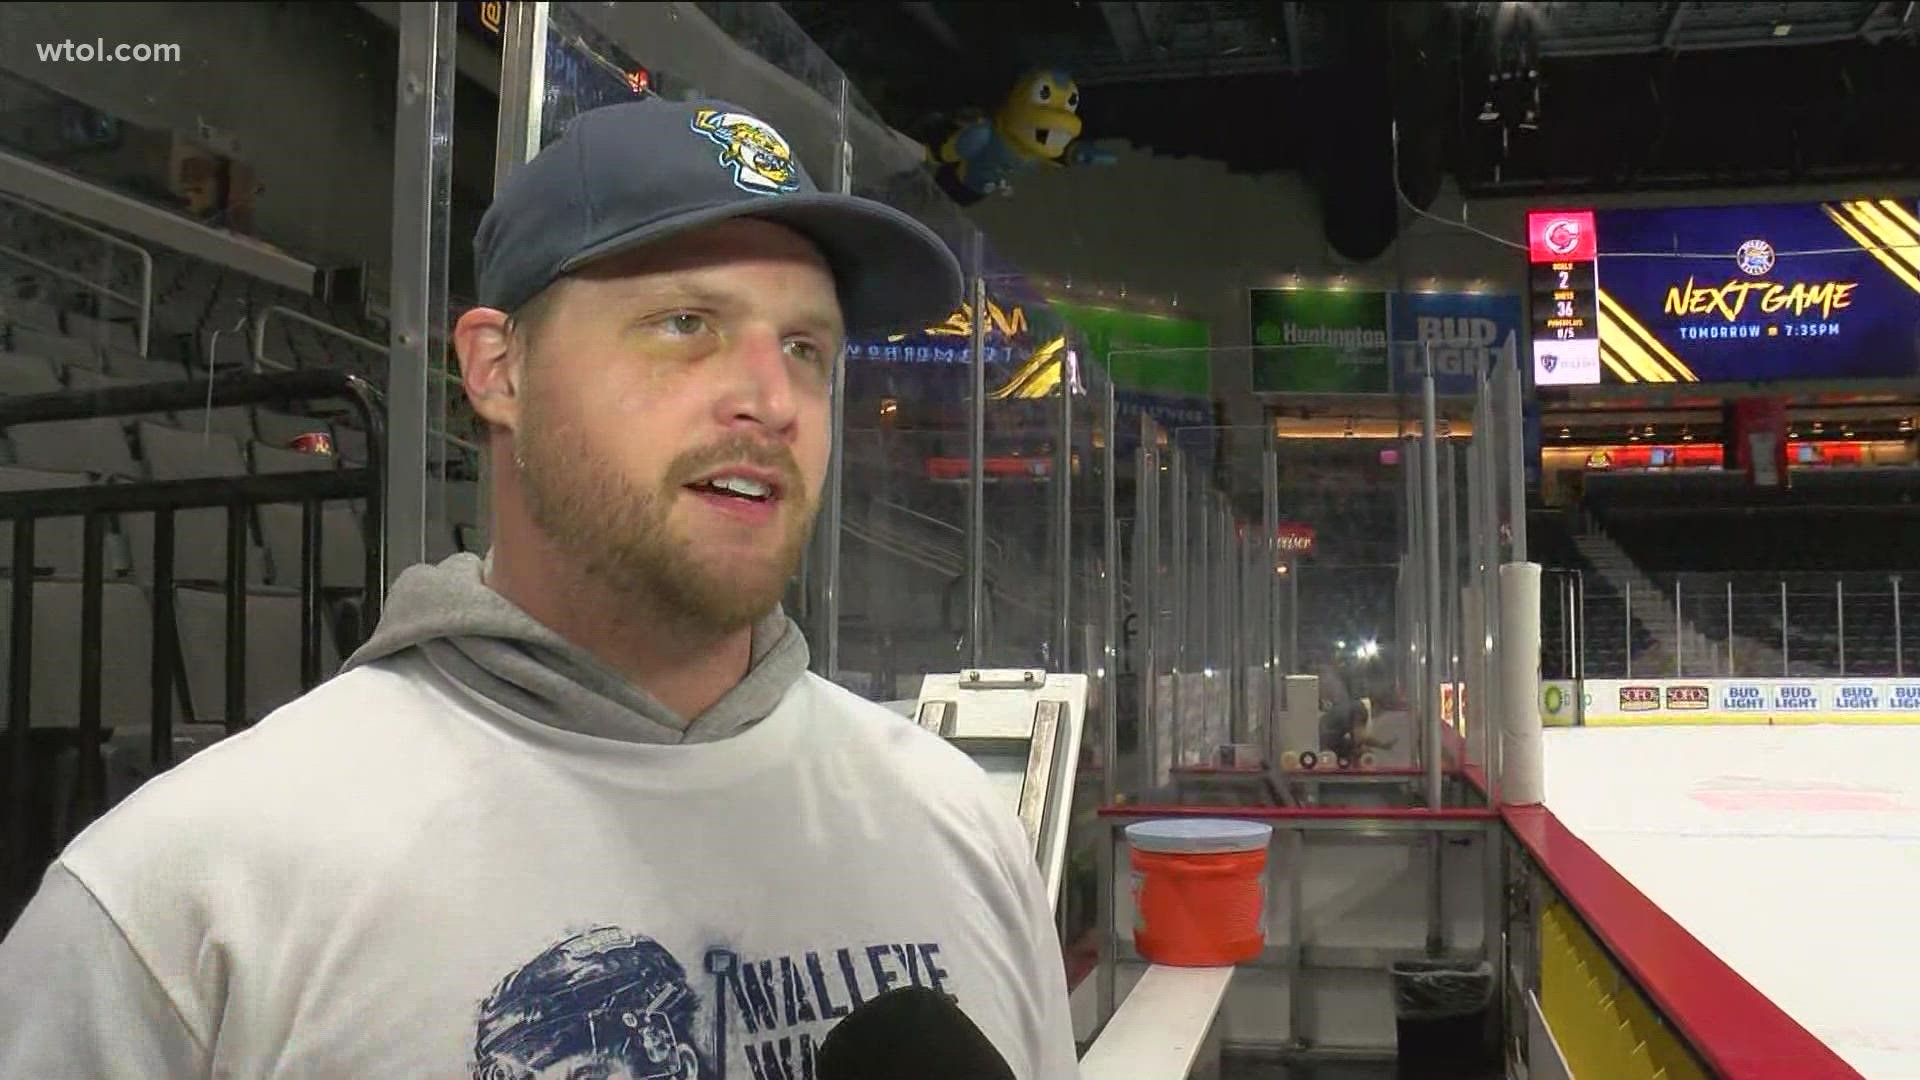 John Albert was the star of Game 1 of the Kelly Cup Playoffs for the Toledo Walleye, scoring all three goals in the OT win. Jordan Strack's live with the interview.